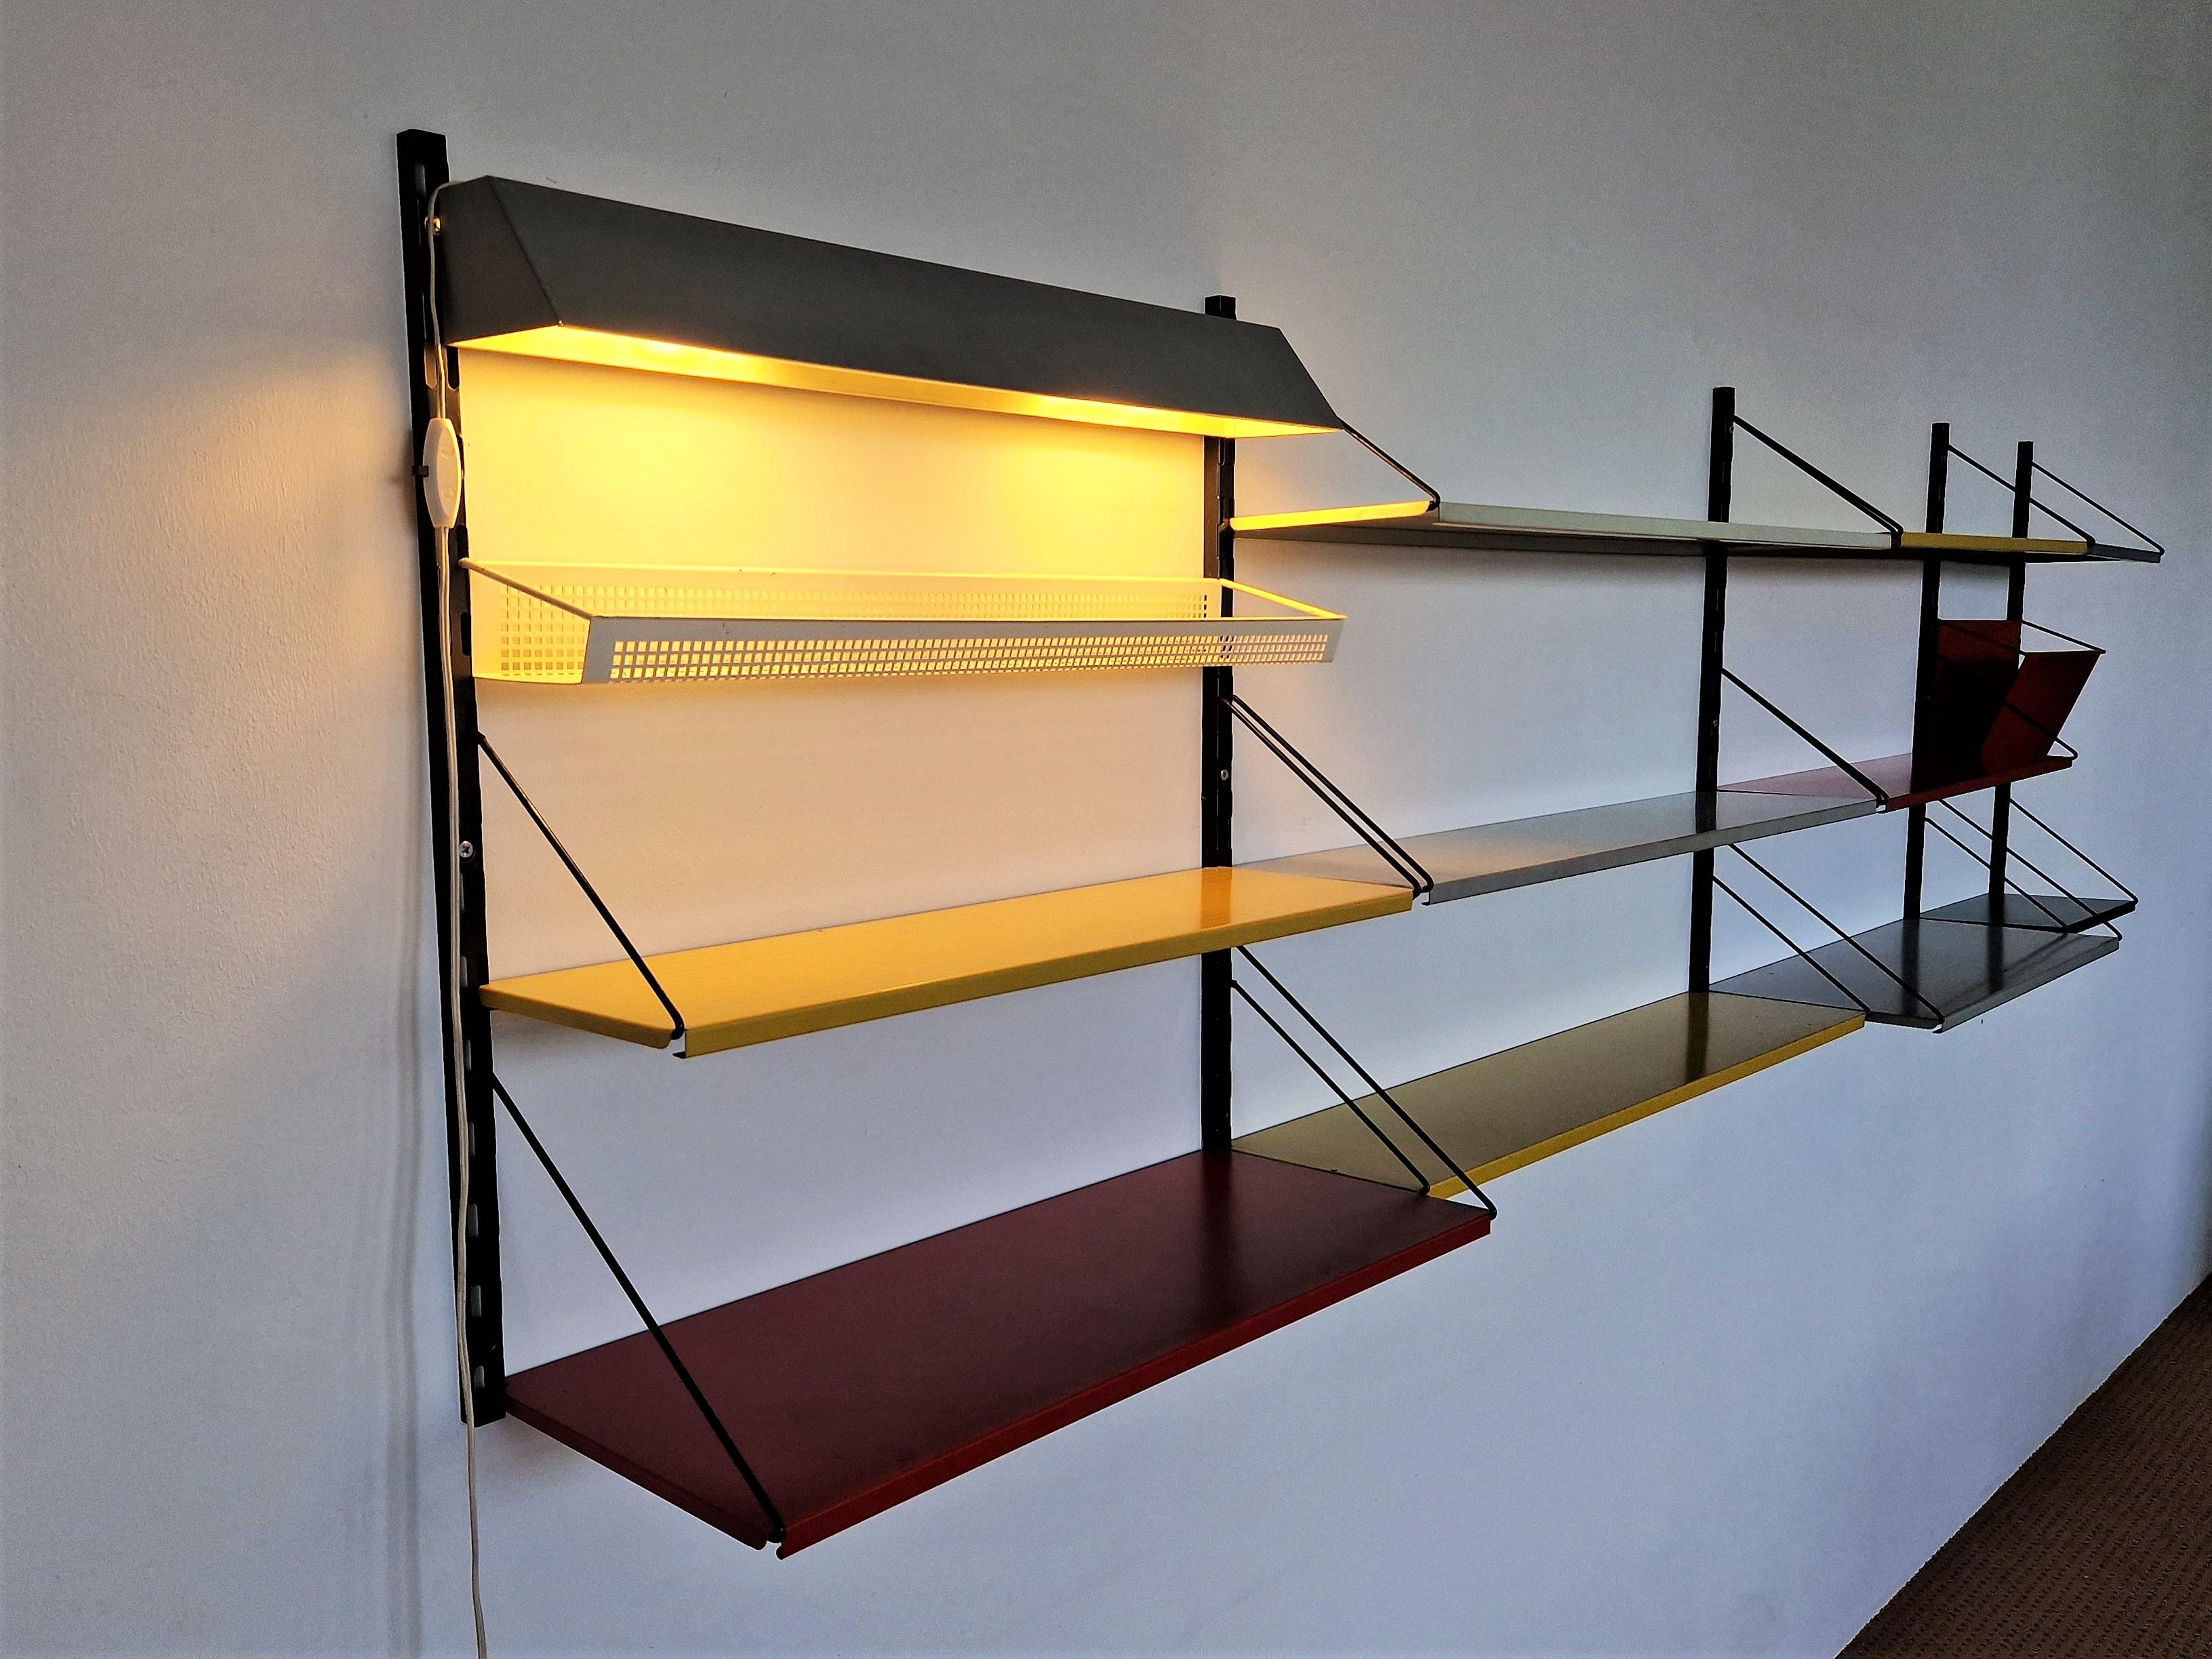 Multicolored Wall Unit by Tjerk Rijenga for Pilastro, the Netherlands 1960's For Sale 1